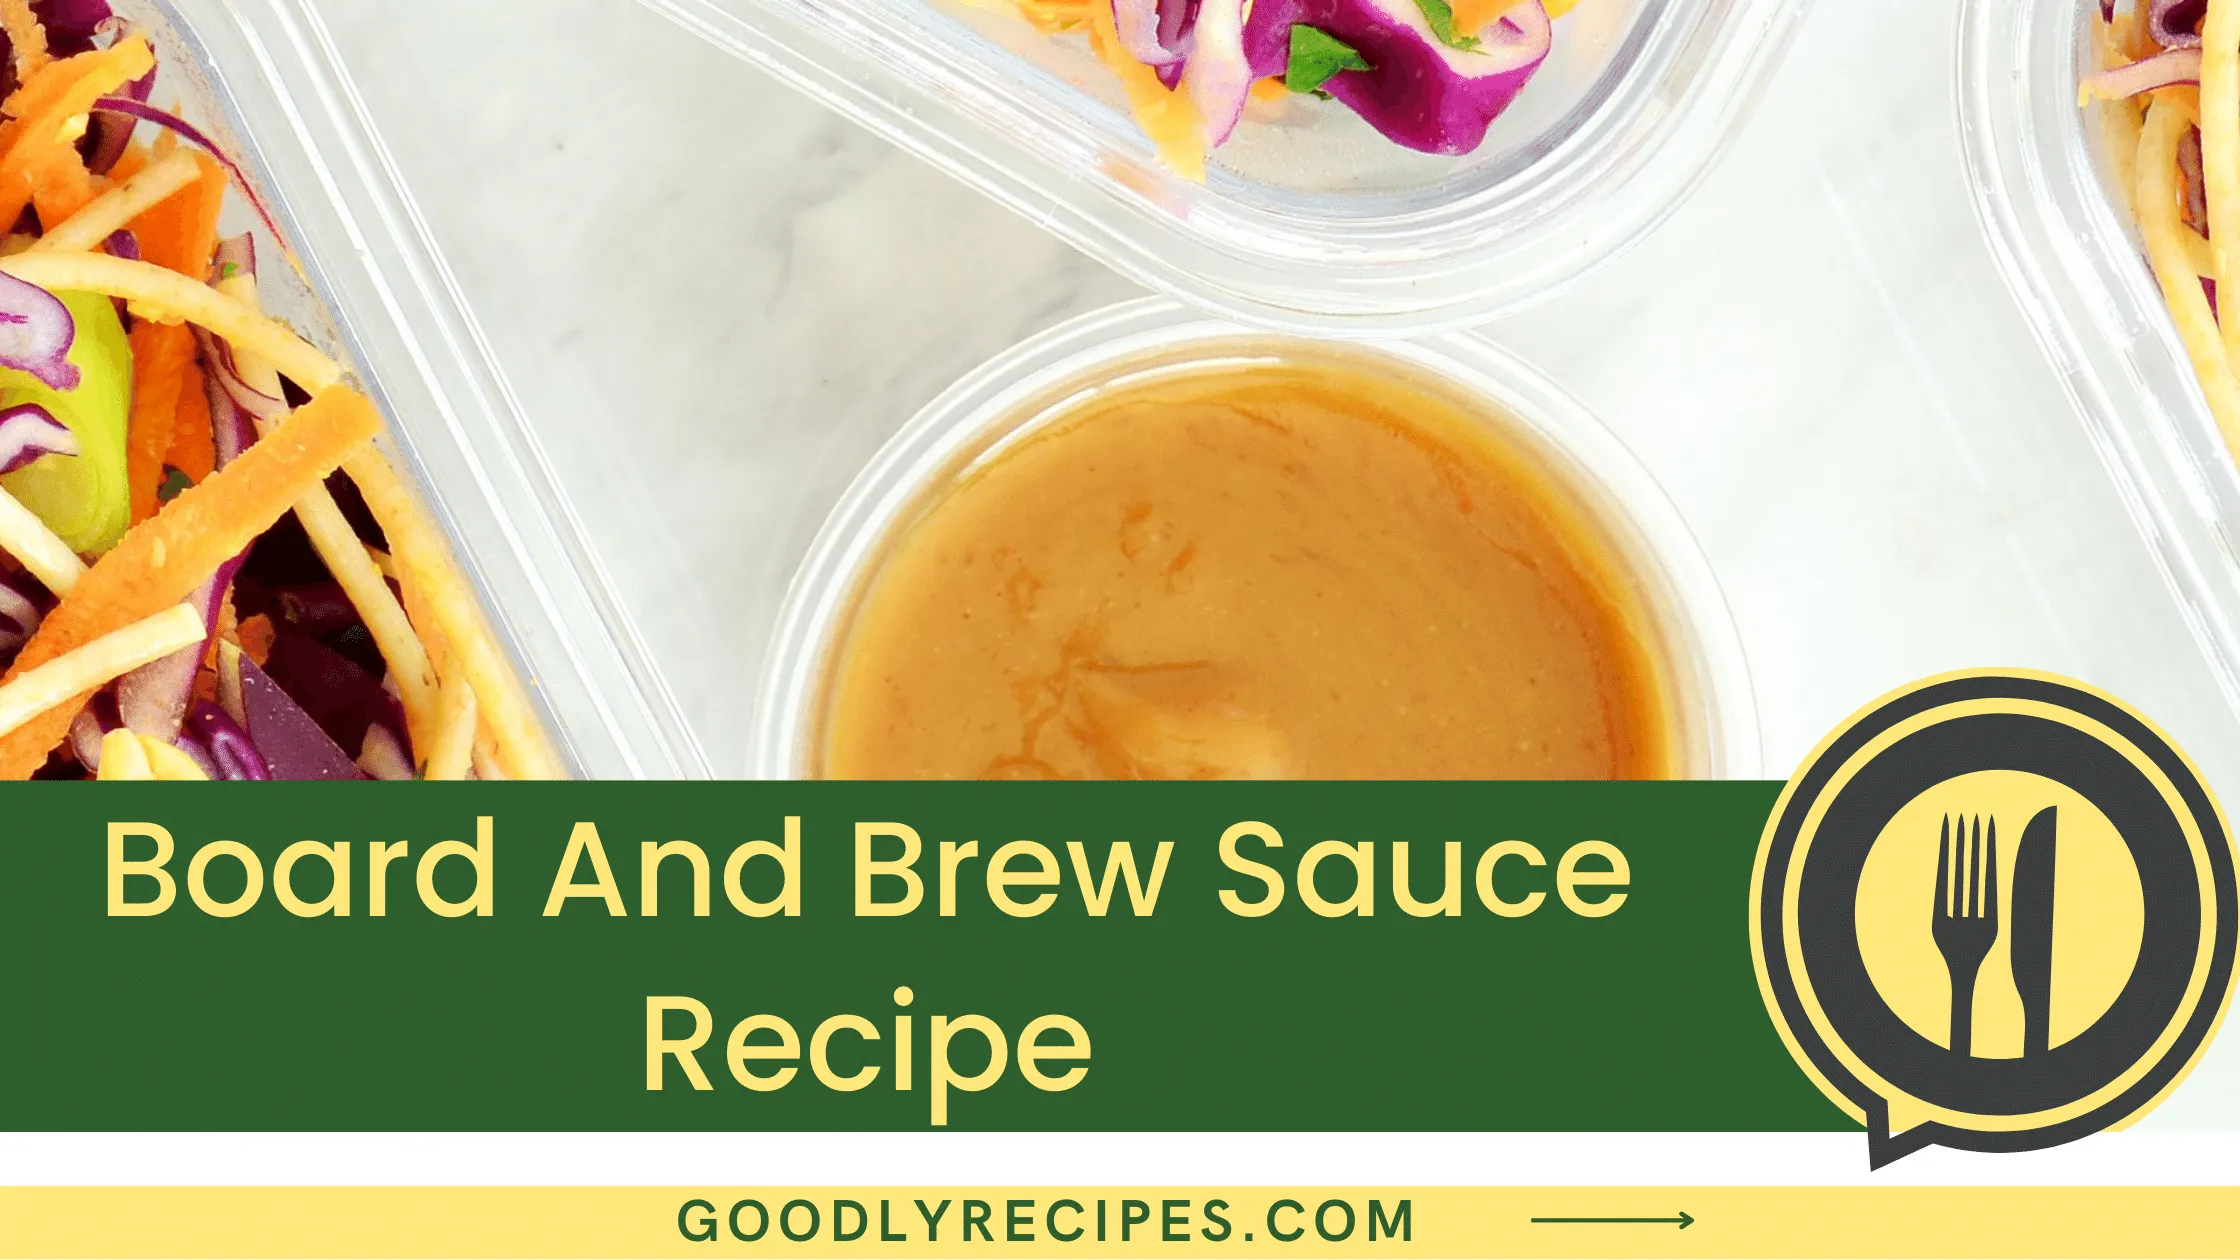 What is Board and Brew Sauce Recipe?